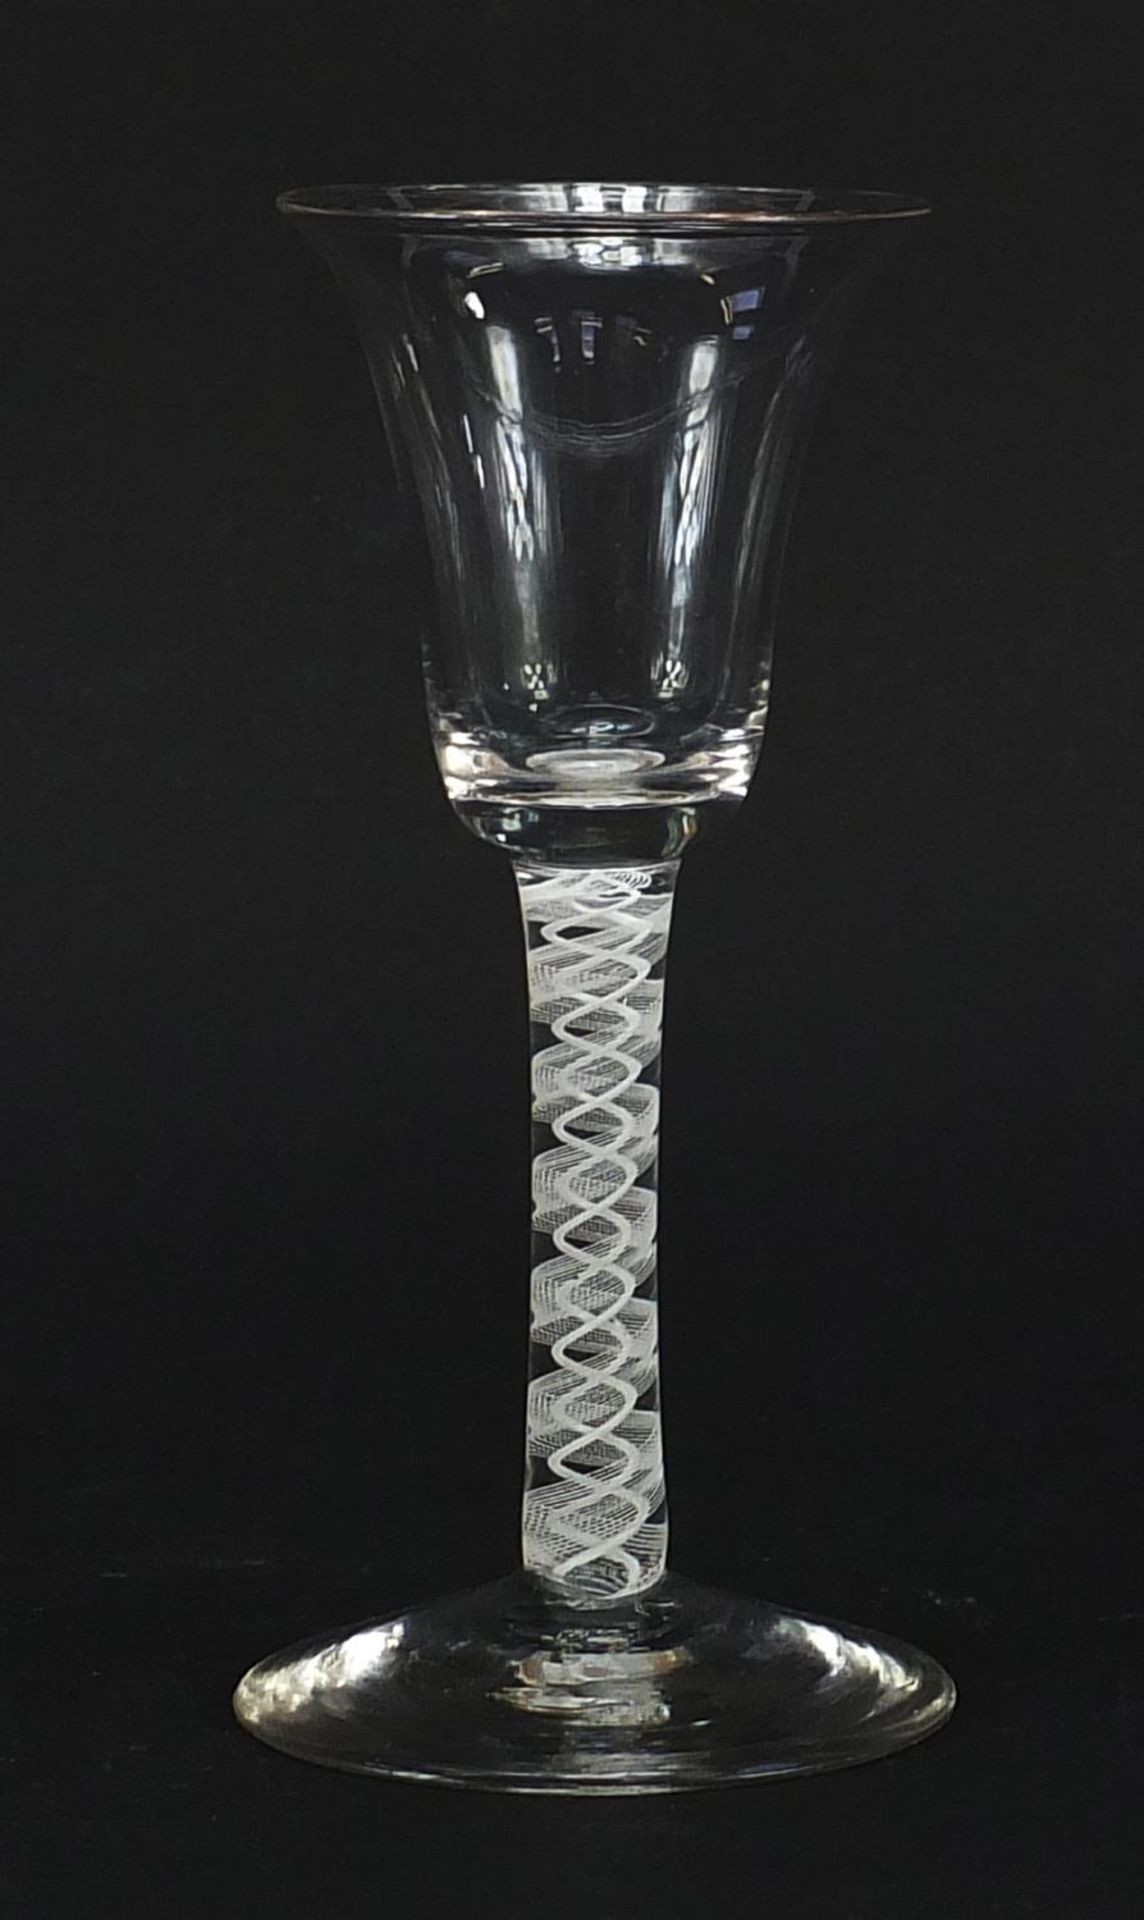 18th century wine glass with bell shaped bowl and multiple opaque twist stem, 16cm high - Image 2 of 3